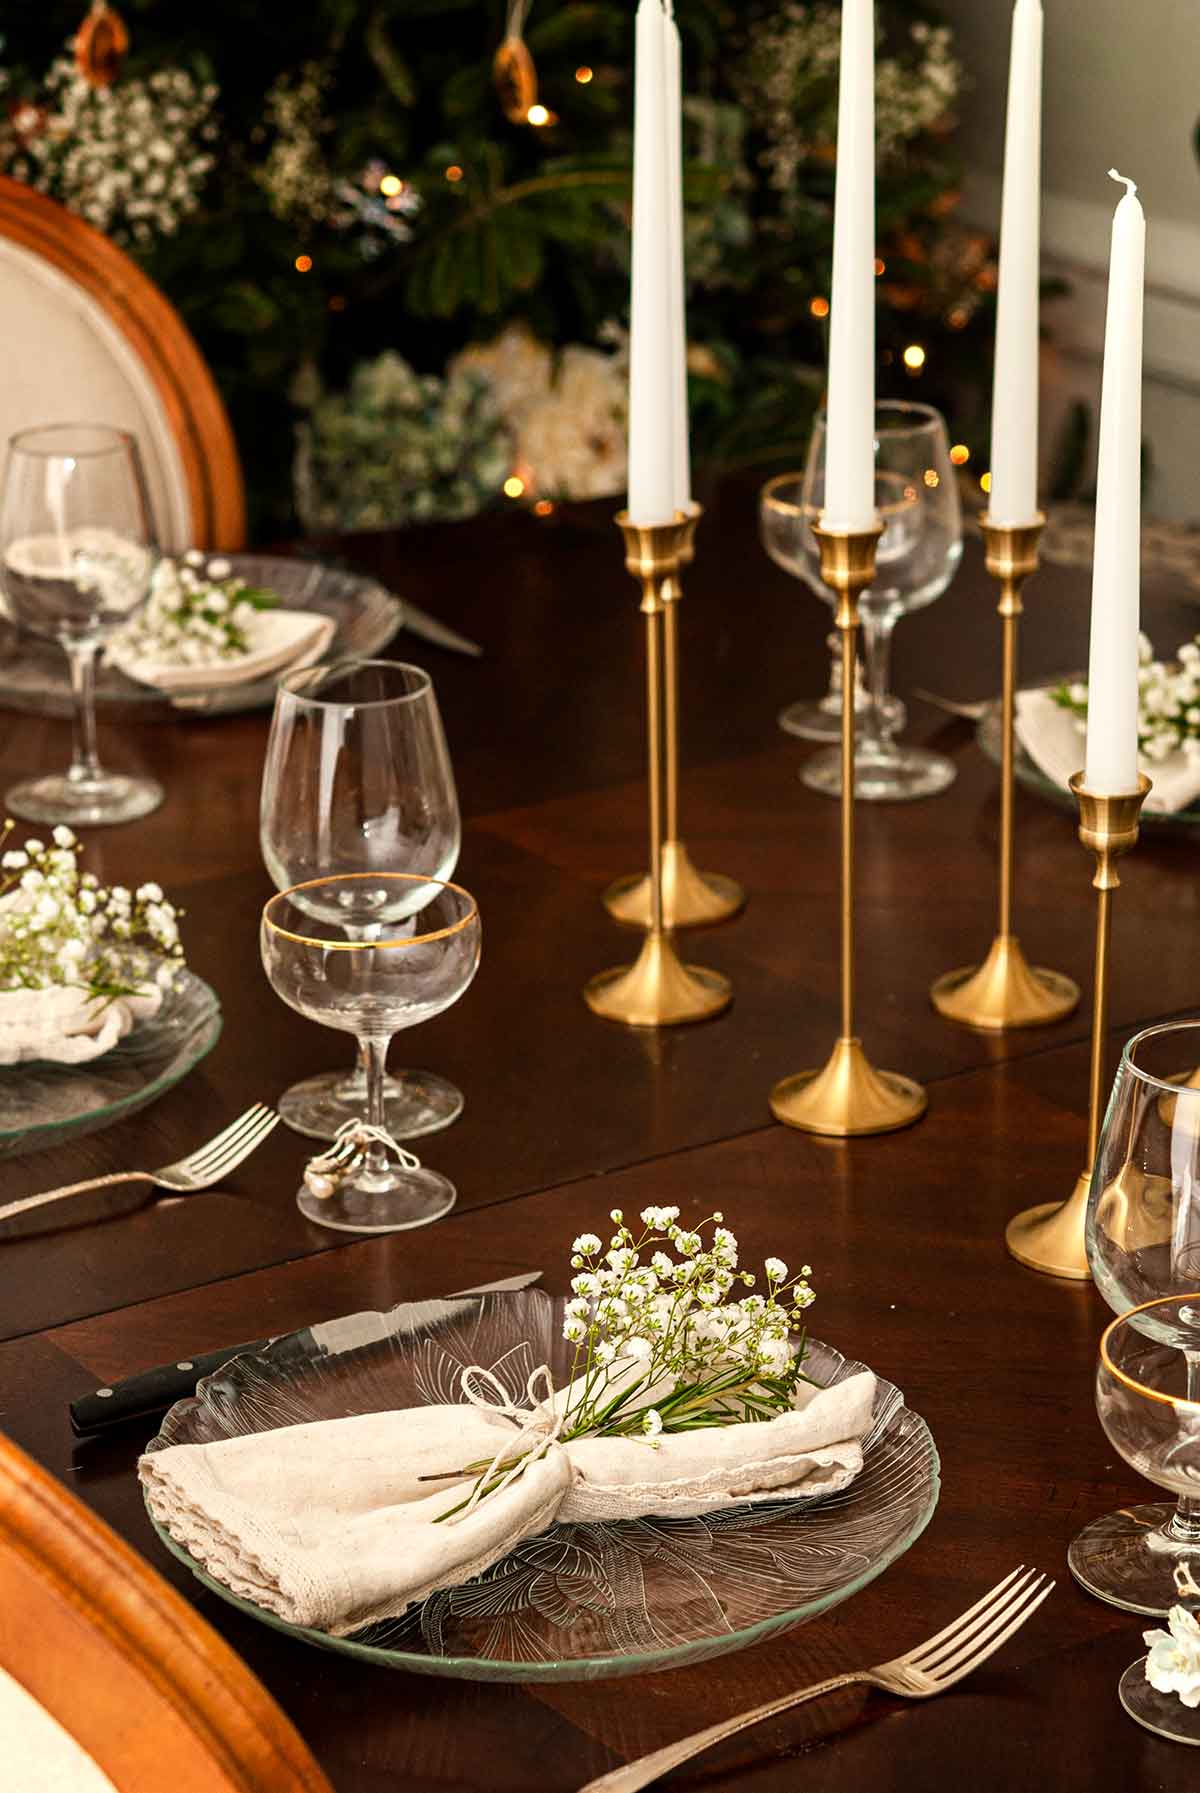 A beautifully set Christmas dinner table with baby's breath flowers in the place settings.